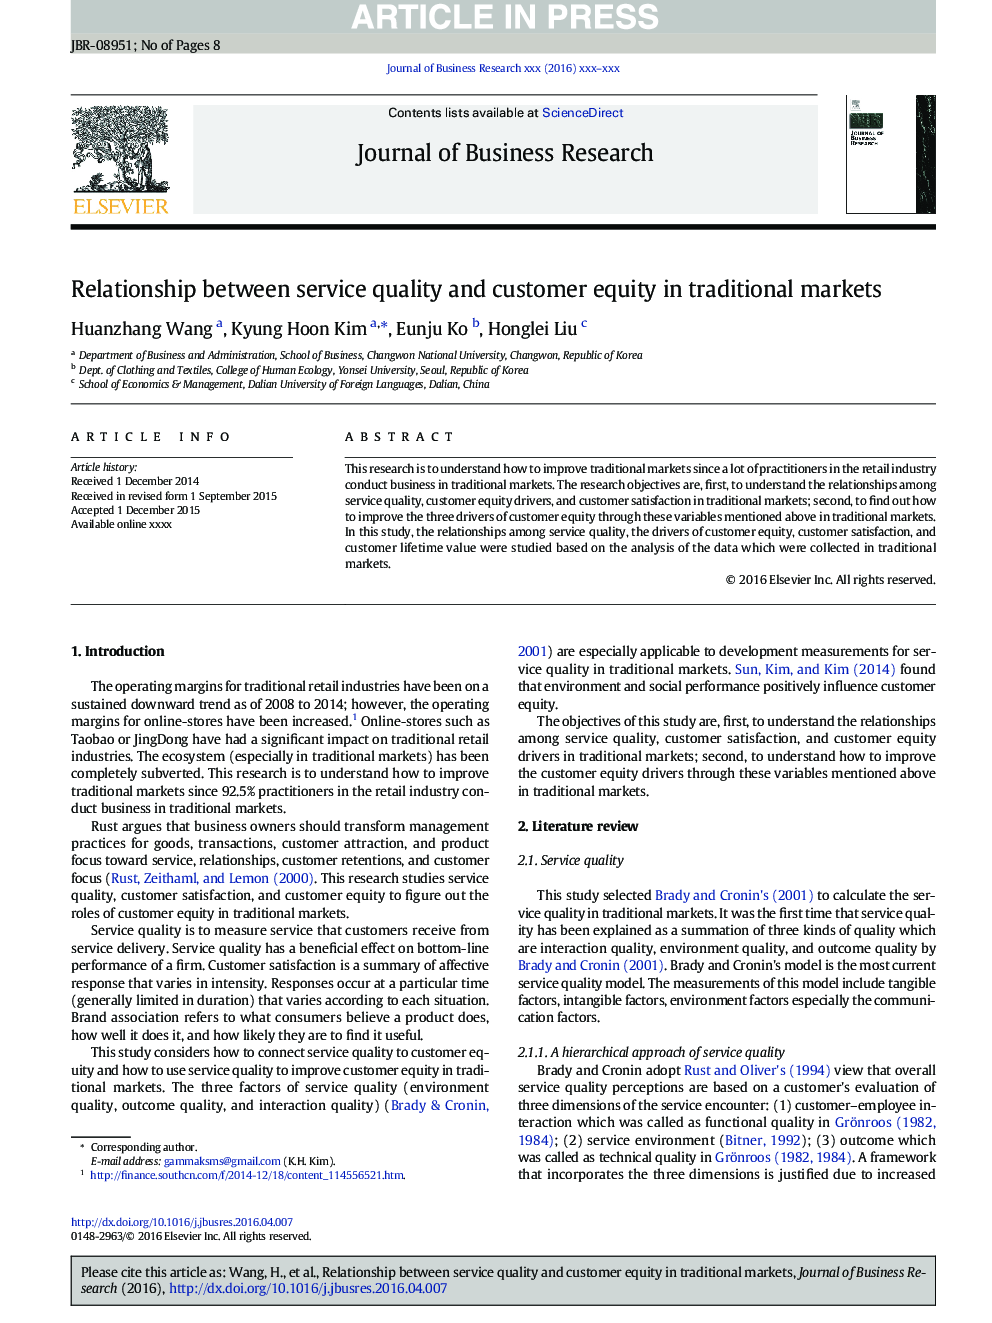 Relationship between service quality and customer equity in traditional markets